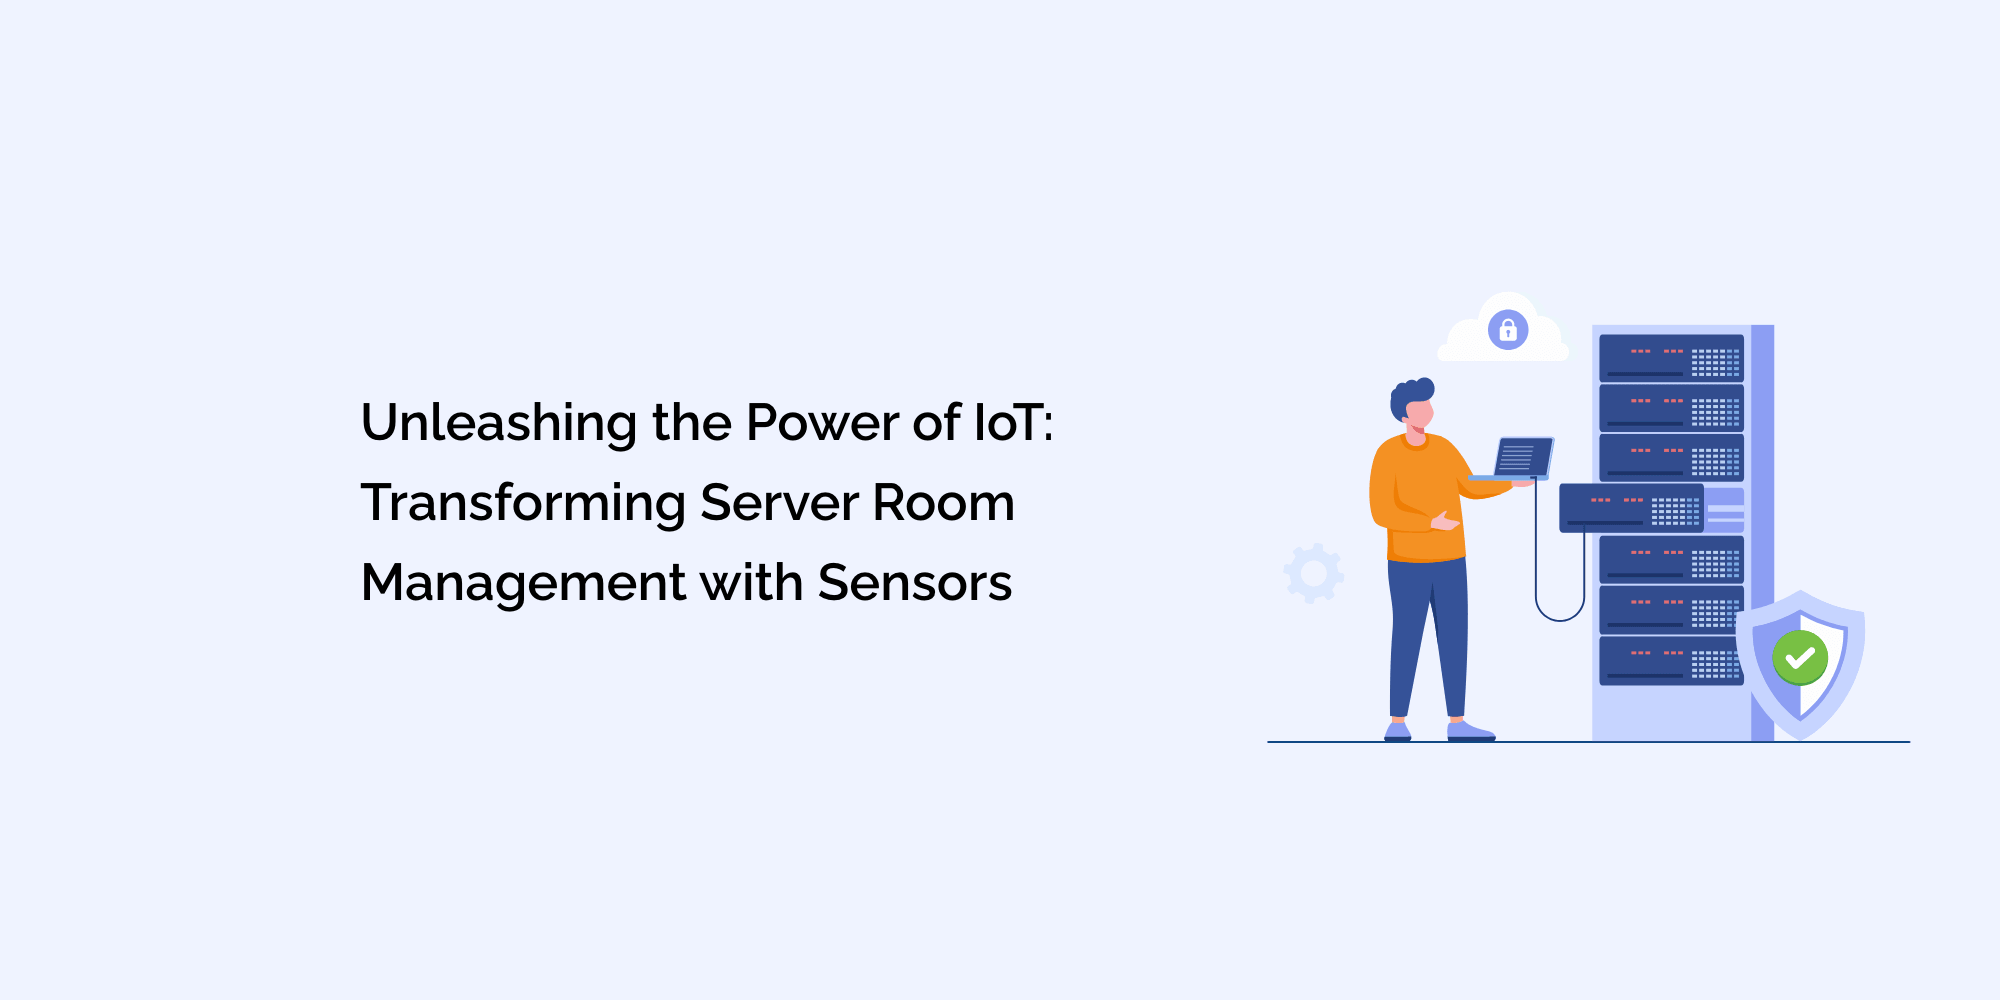 Unleashing the Power of IoT: Transforming Server Room Management with Sensors